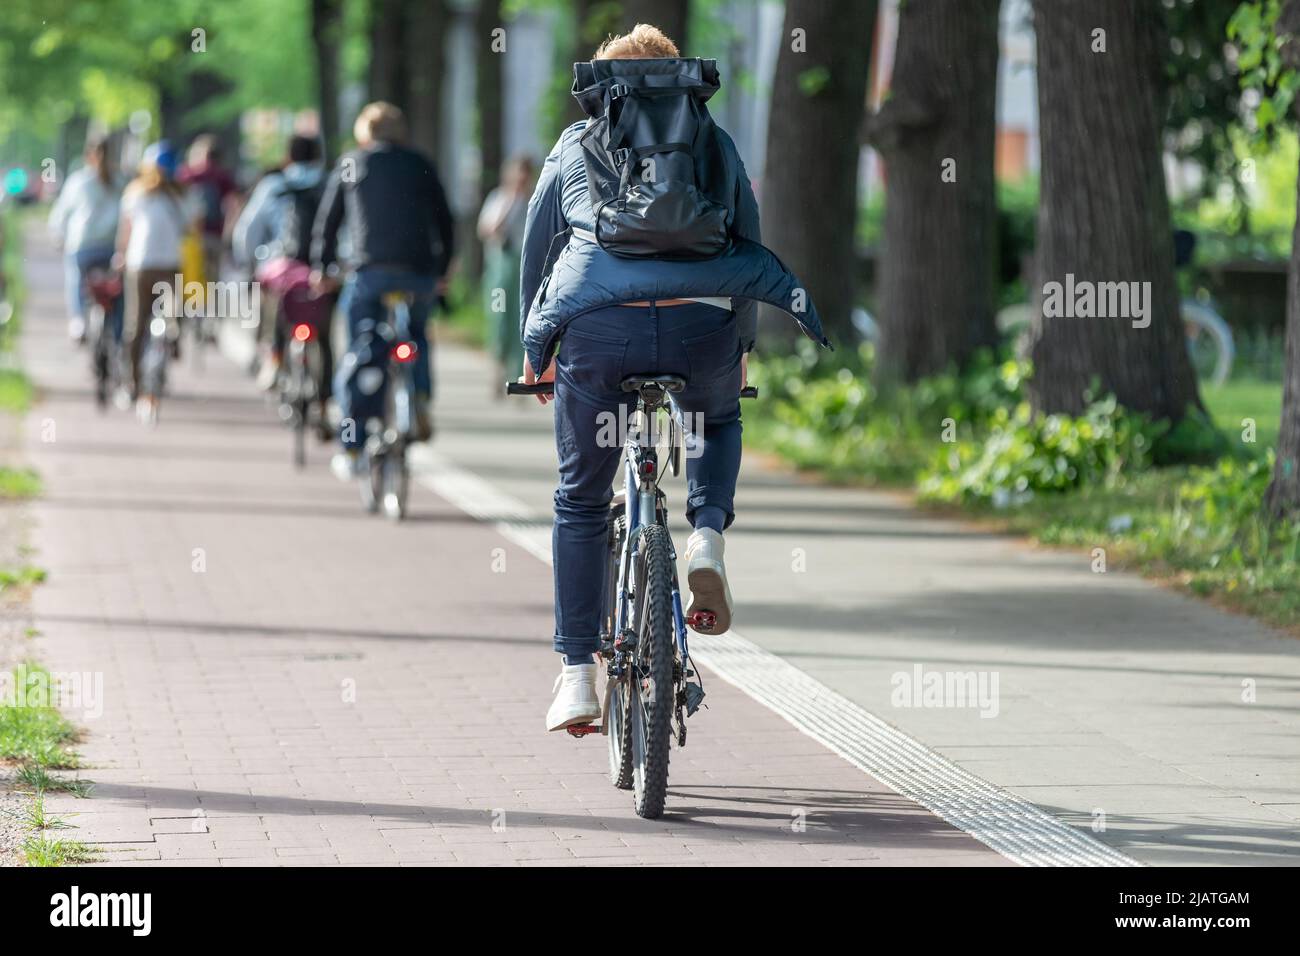 cyclists on a bike path in an avenue Stock Photo